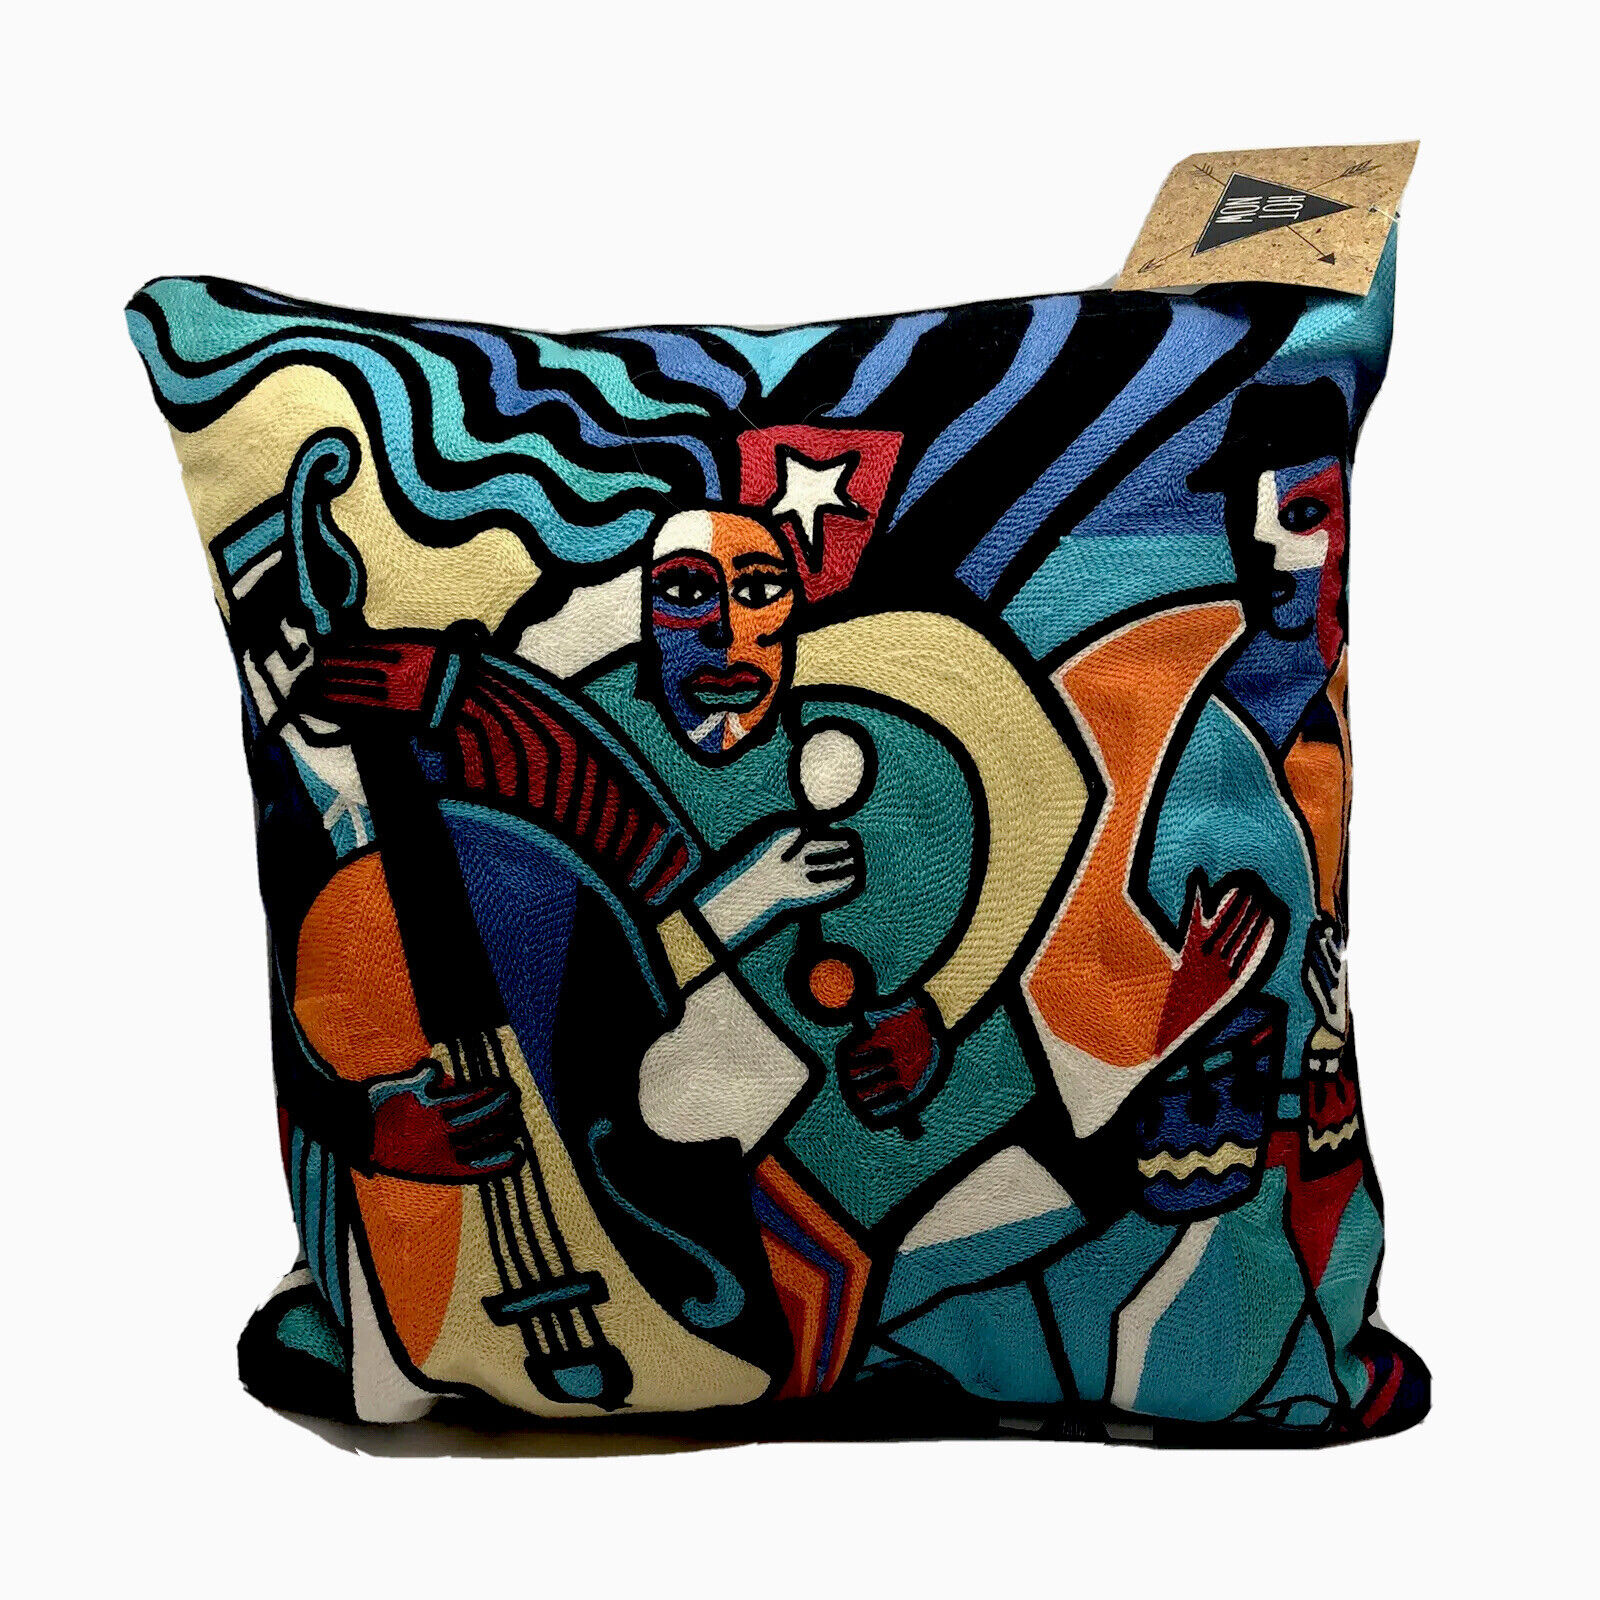 The New Musicians Jazz Pillow 16x16 Decorative Picasso style Needlepoint